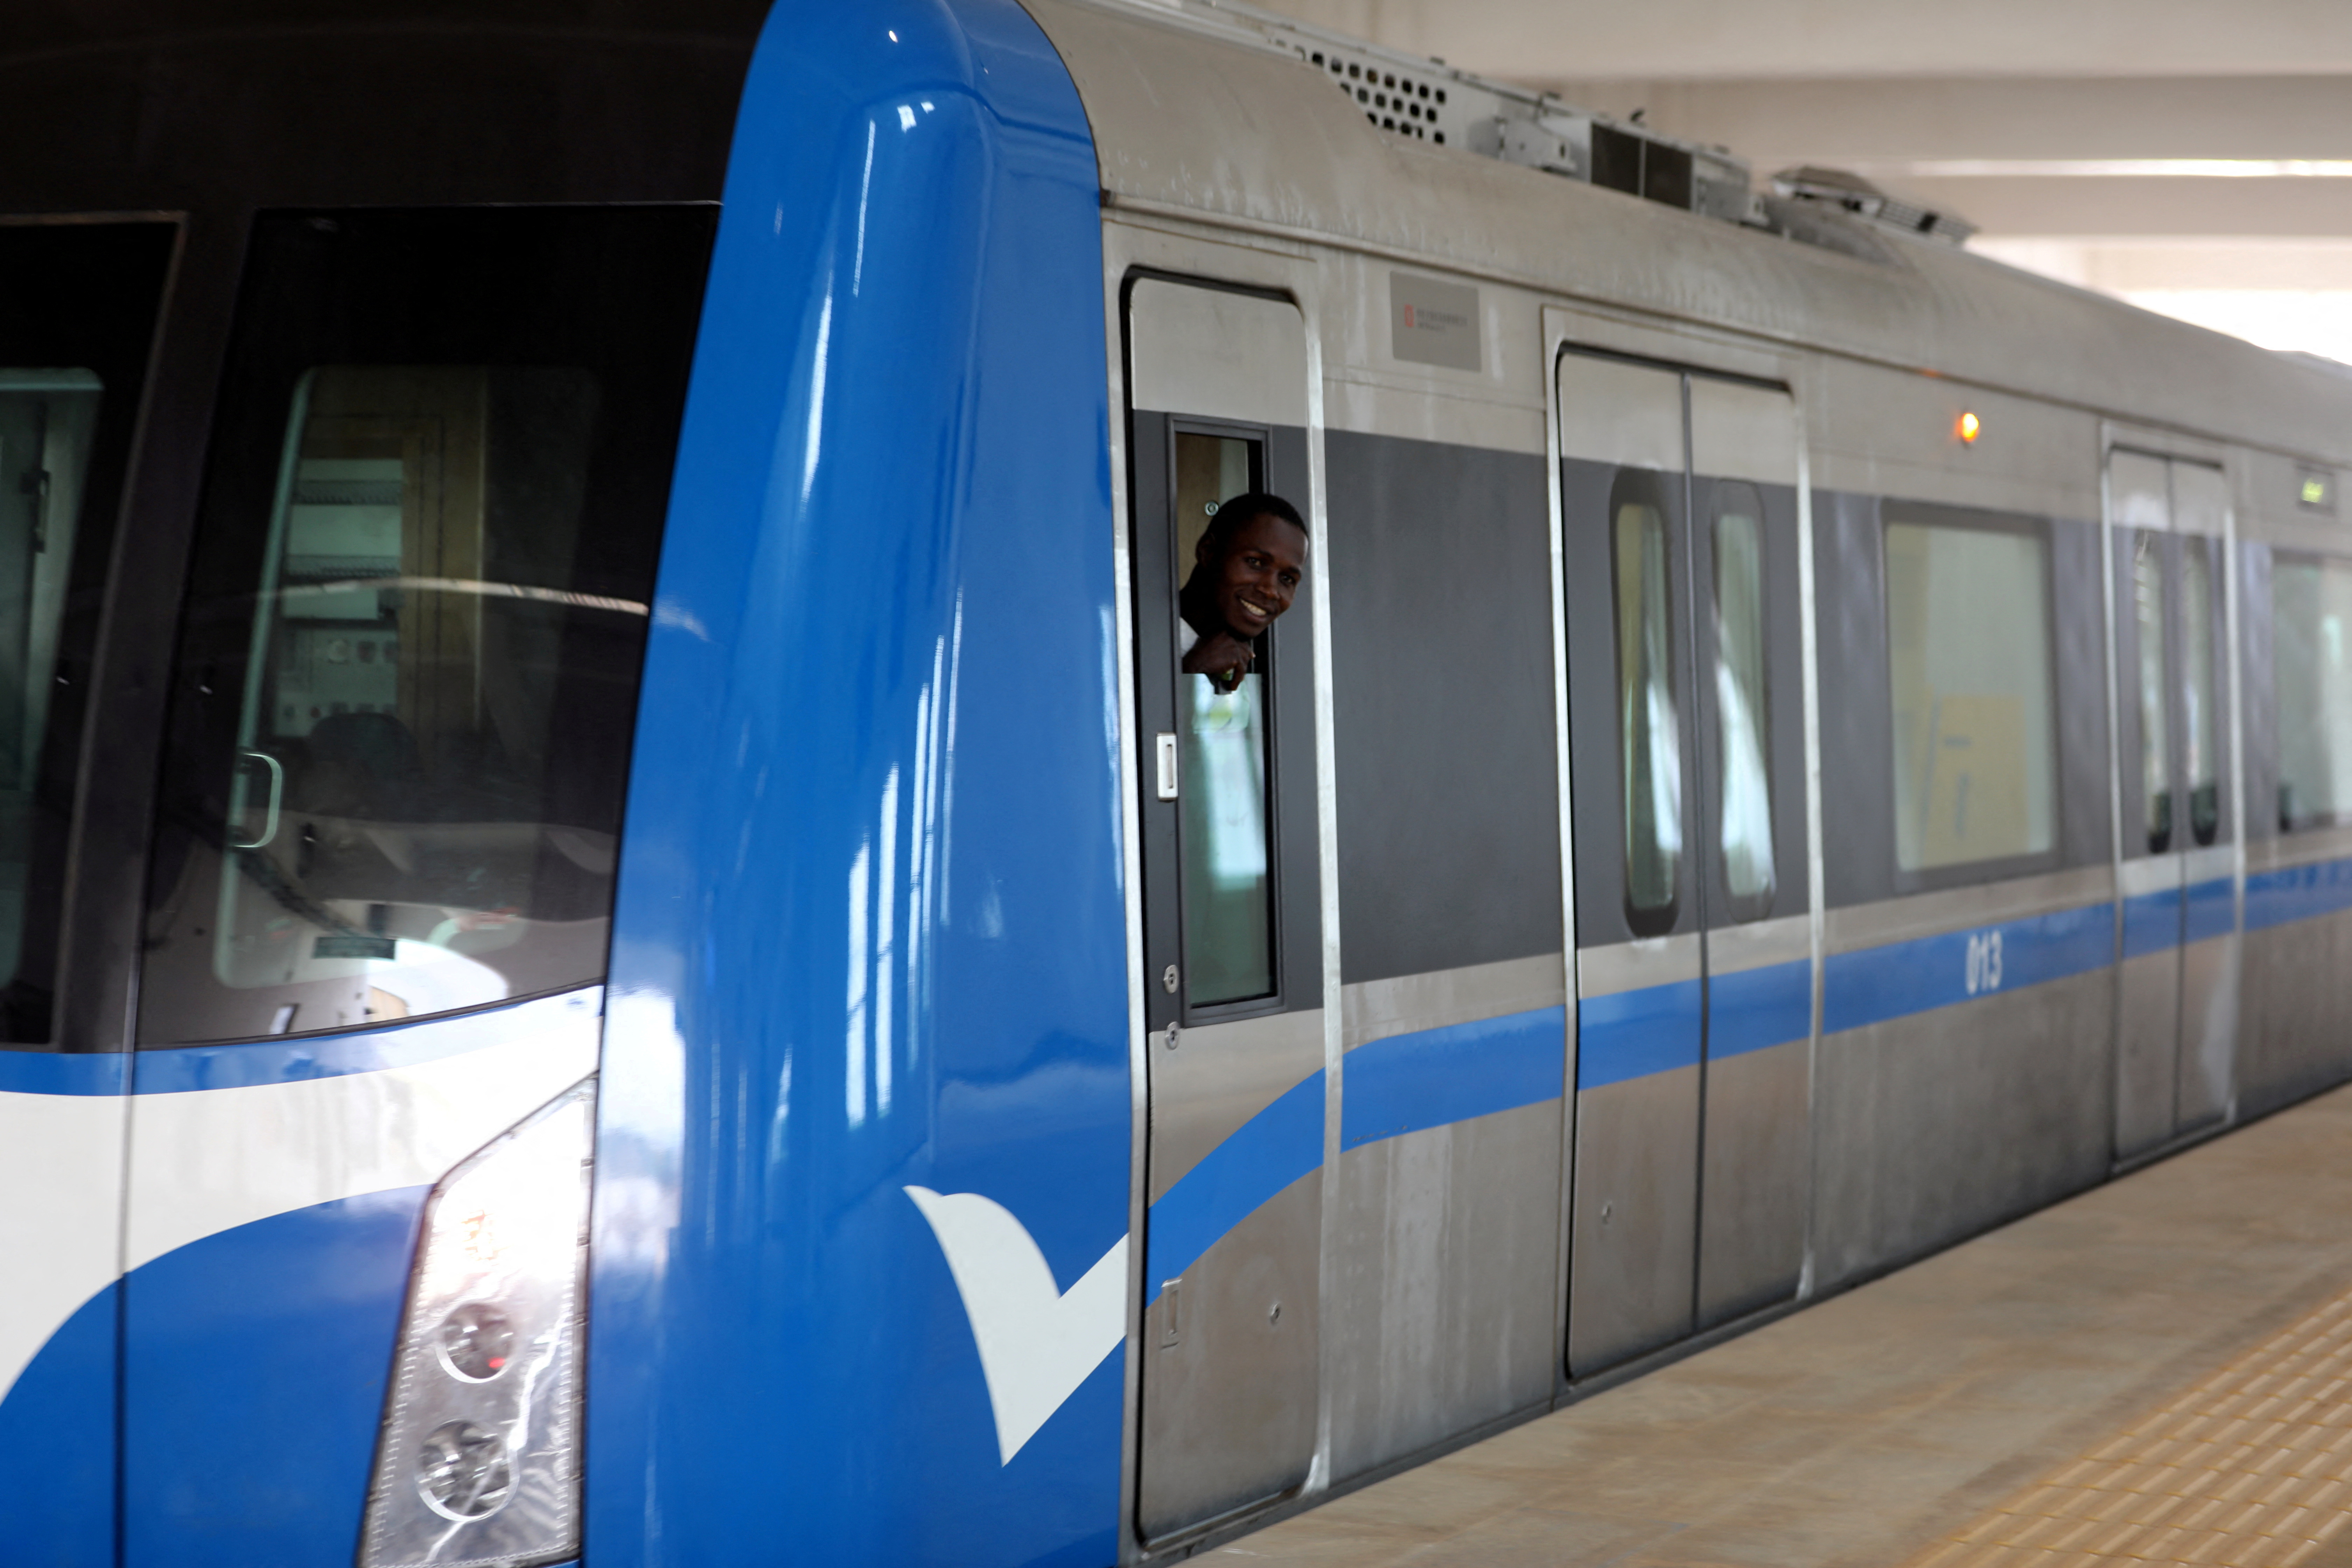 A passenger smiles as he looks out of the newly commissioned Abuja light rail train at the station In Abuja